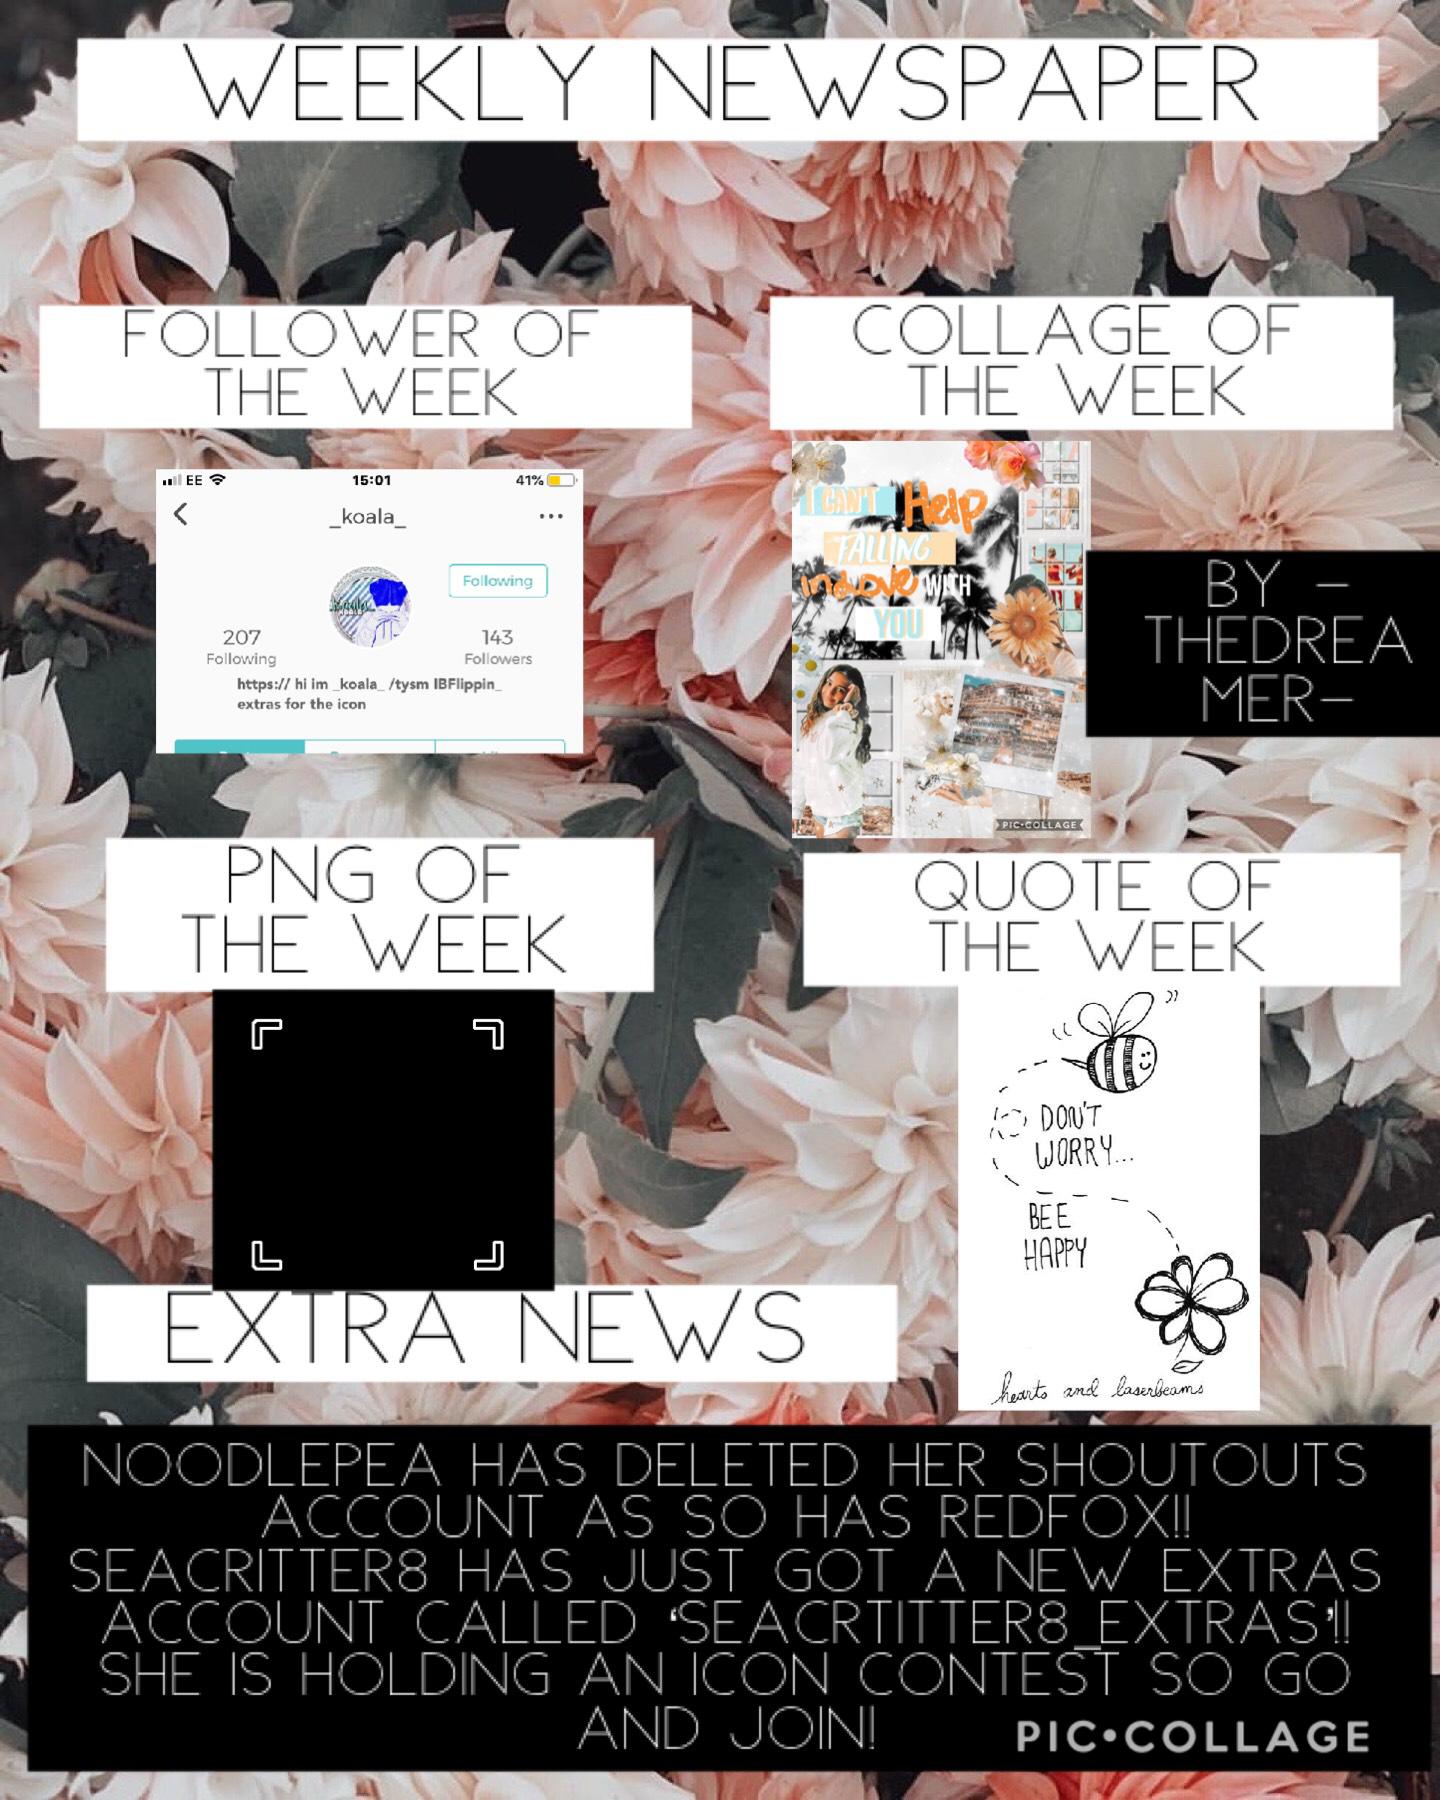 🌷t a p  t h e  f l o w e r🌷

Hey guys this is a new thing comment if you want us to do this more! 

🍁27 o c t o b e r🍁